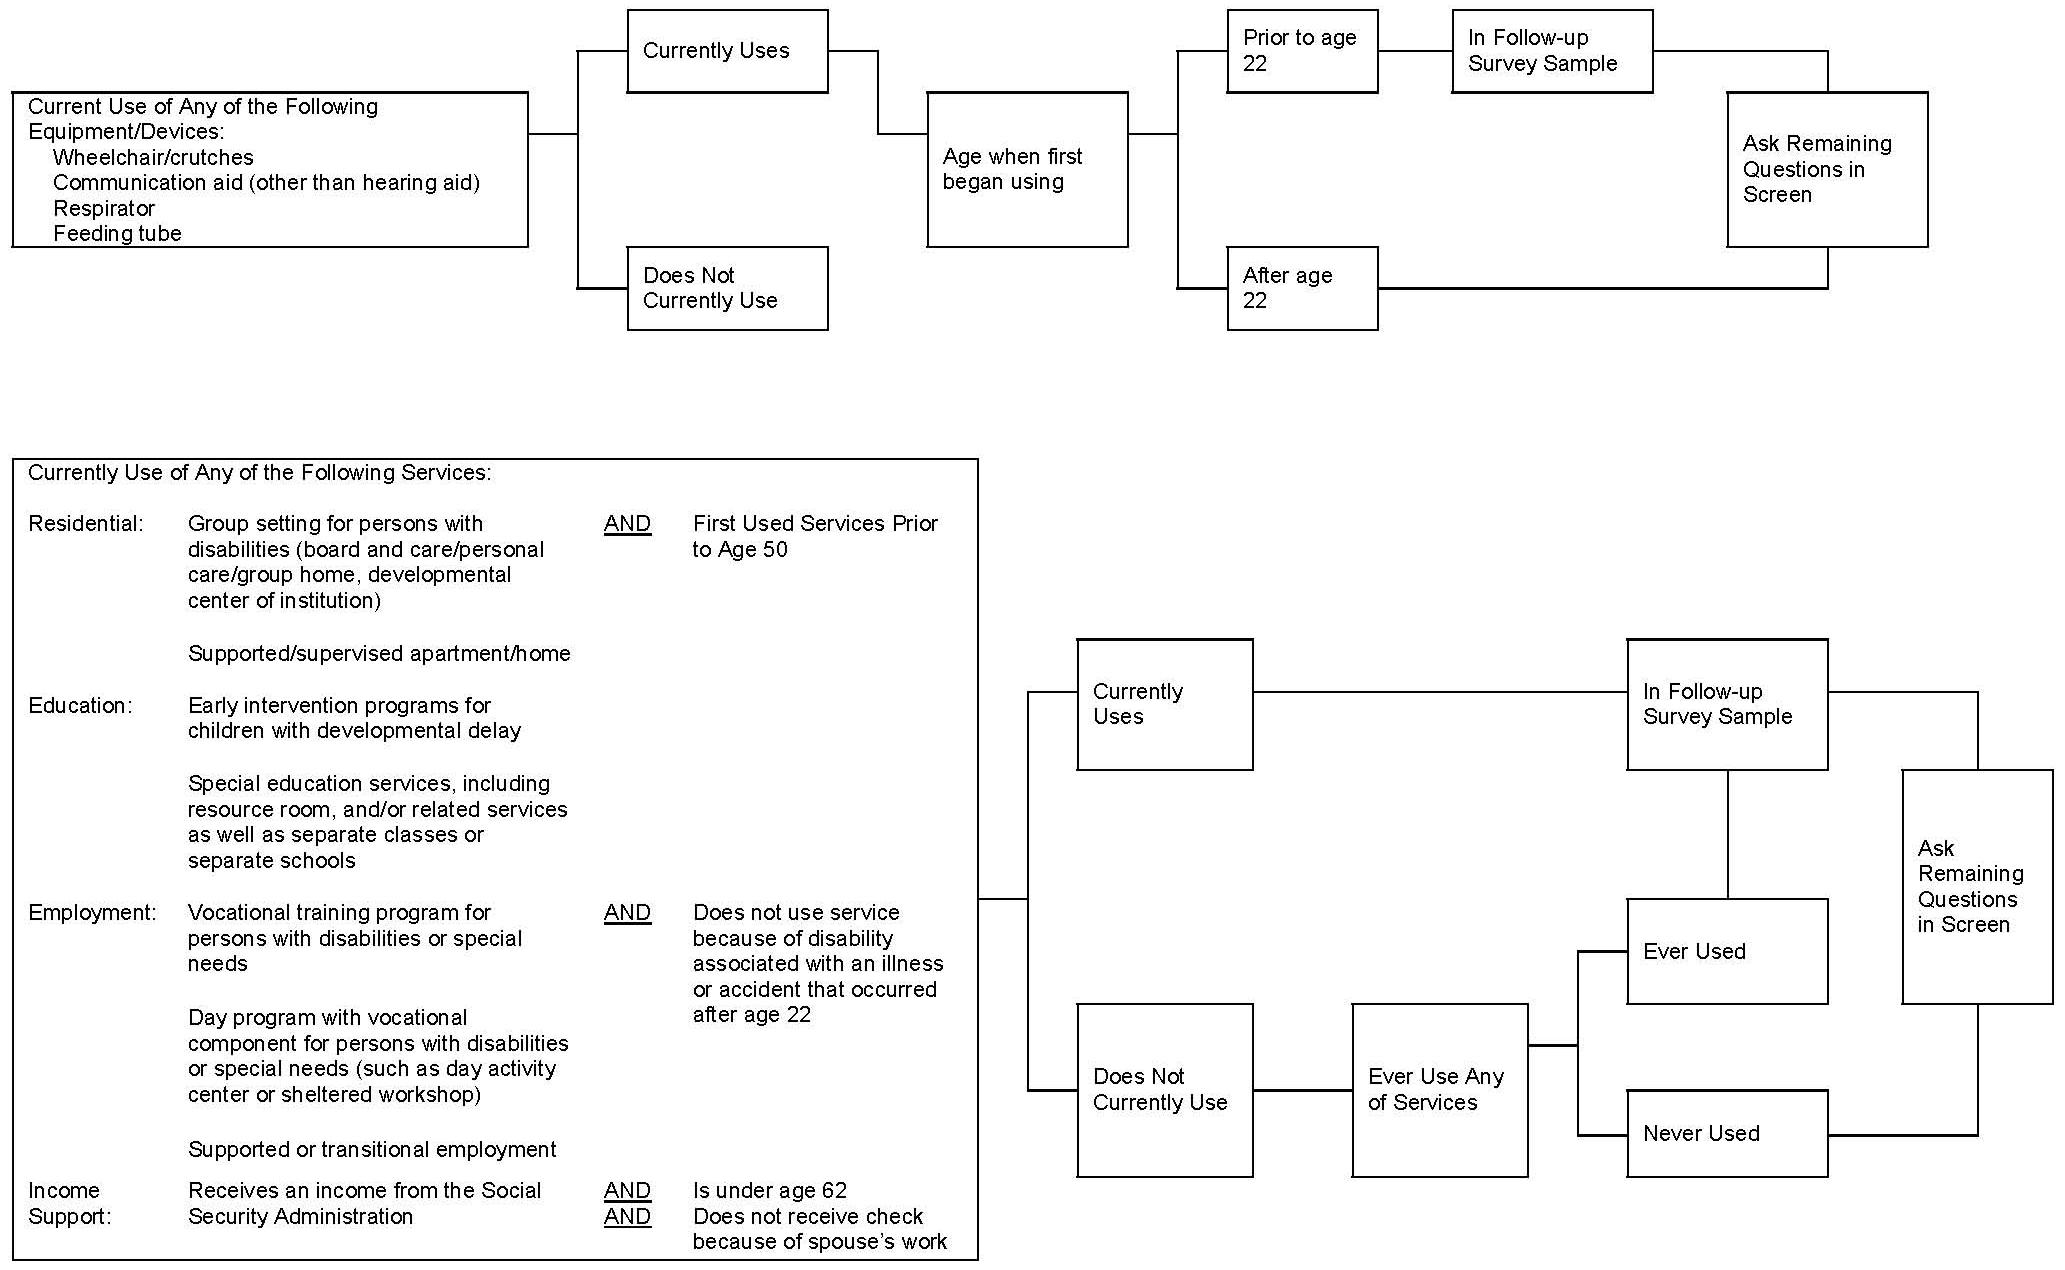 Organizational Chart: Screening on Use of Selected Services